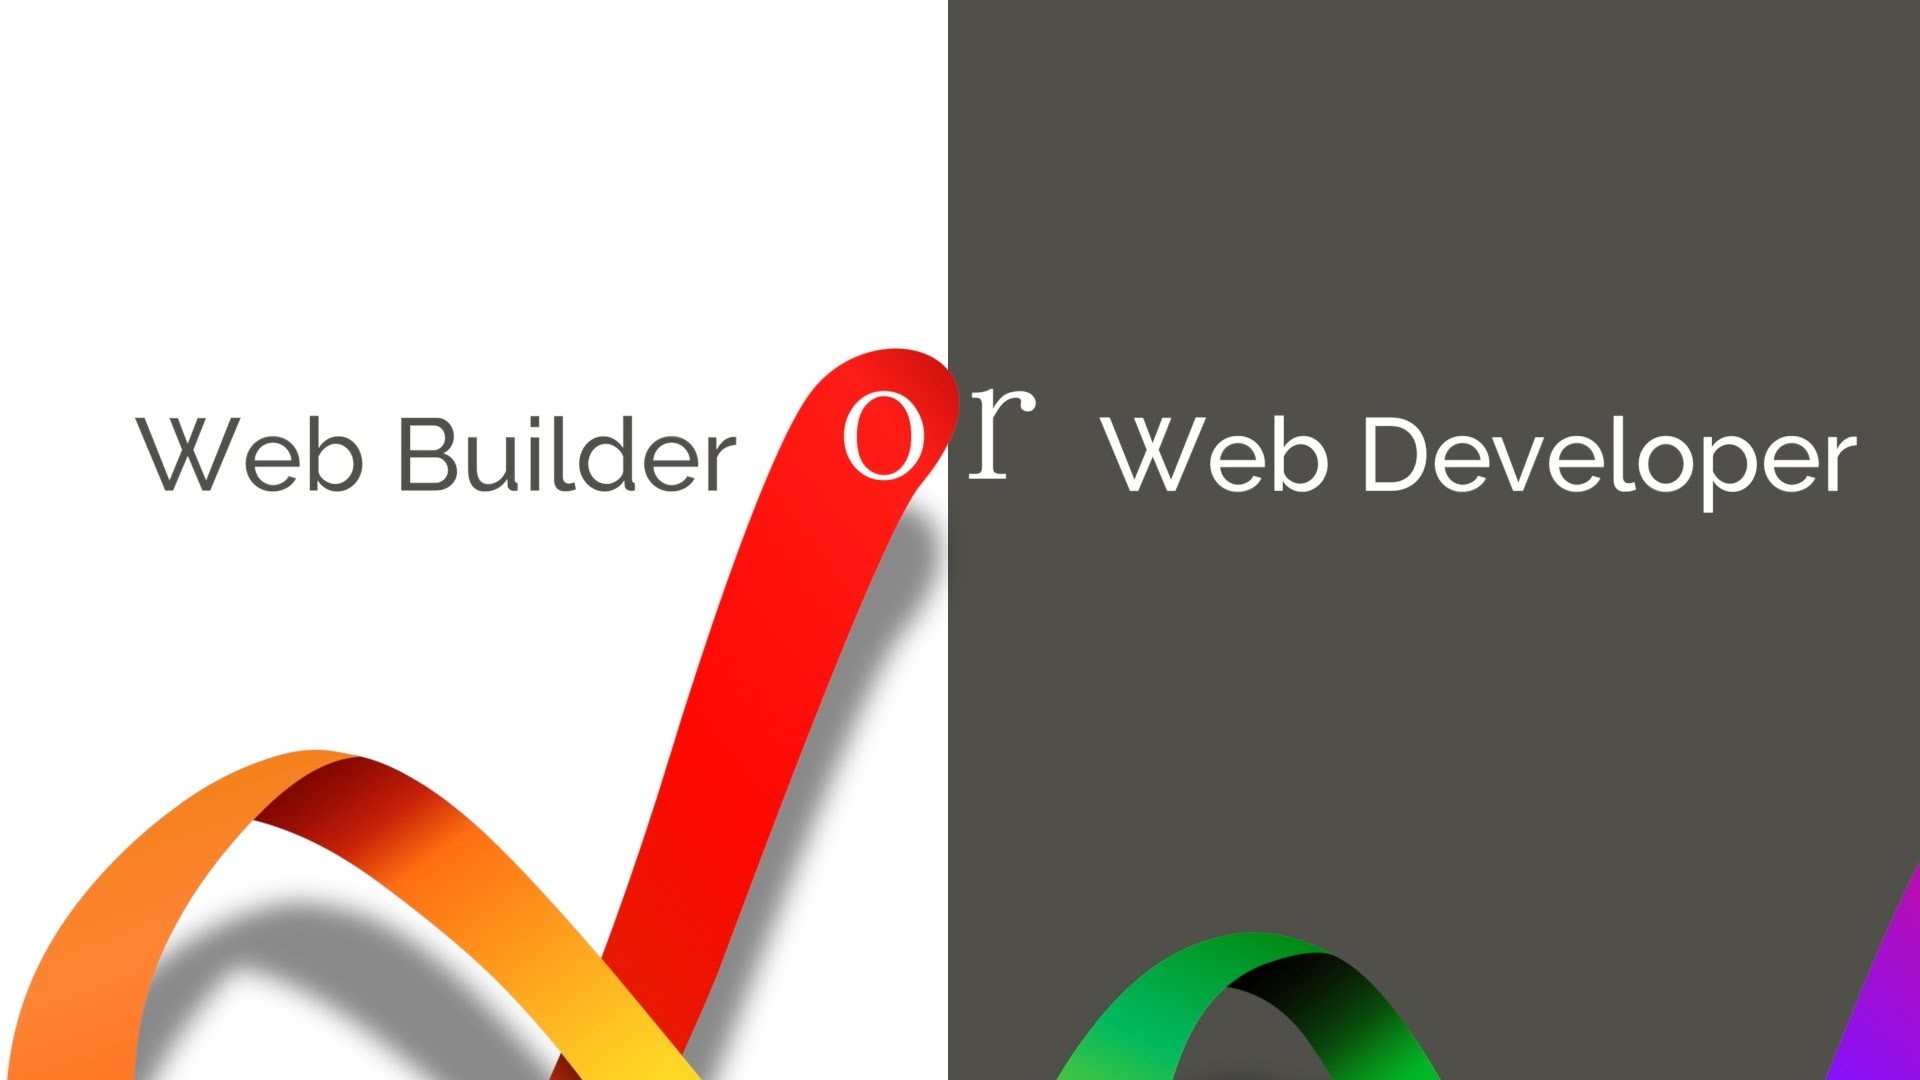 1920x1080 Should You Choose an eCommerce Web Developer or a Web Builder? - YouTube